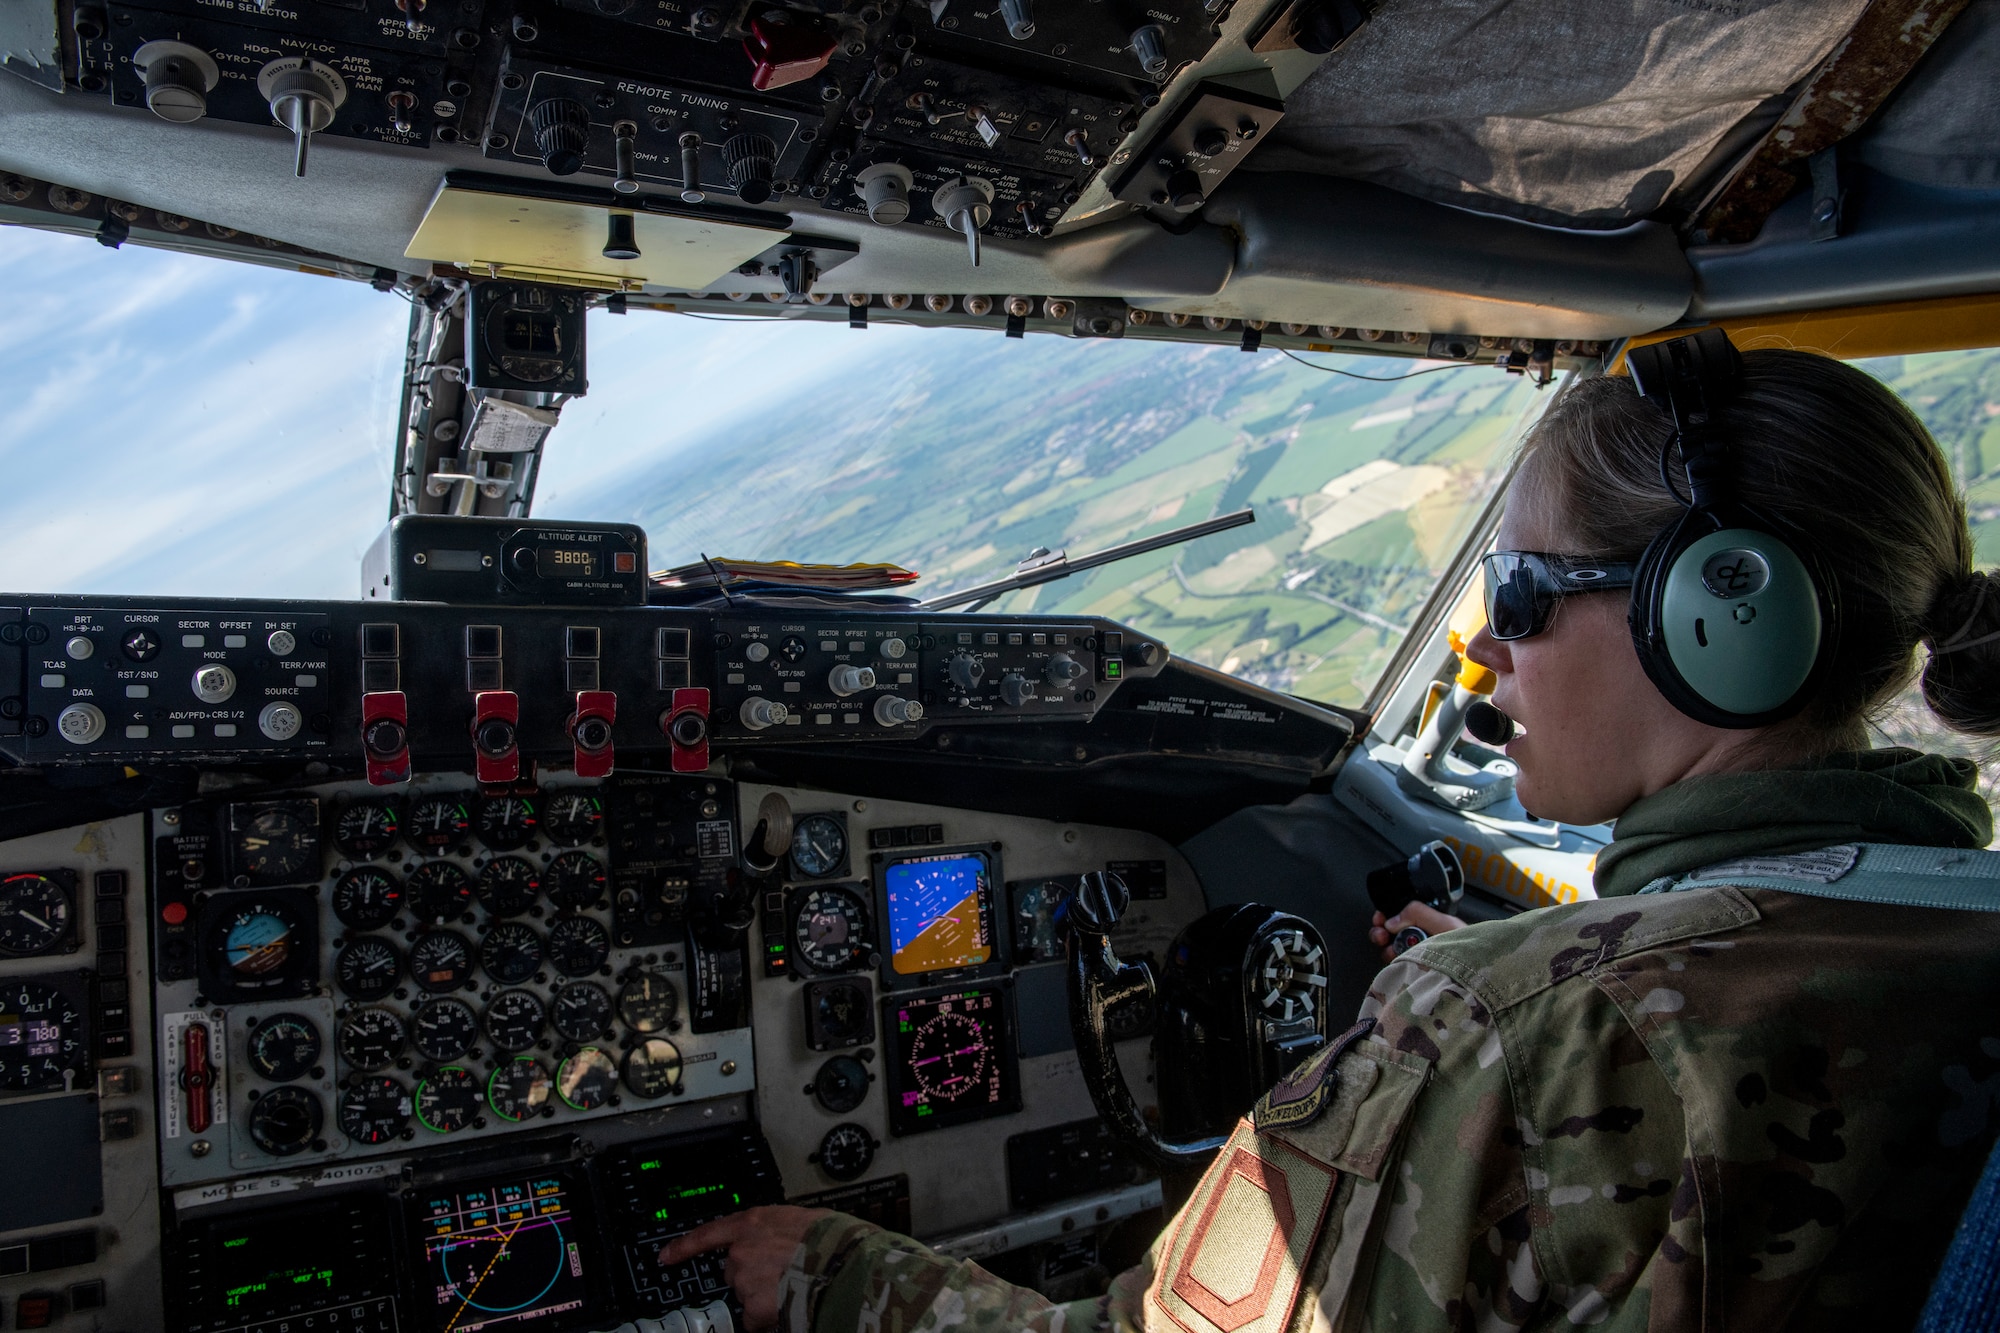 Captain Megan Bowman, 351st Air Refueling Squadron pilot, flies a KC-135 Stratotanker over England after supporting a Bomber Task Force Europe mission, April 23, 2020. The mission marked the first time B-1s have flown over Sweden to integrate with Swedish Gripens while conducting close-air support training with Swedish Joint Terminal Attack Controller ground teams at Vidsel Range. (U.S. Air Force photo by Tech. Sgt. Emerson Nuñez)